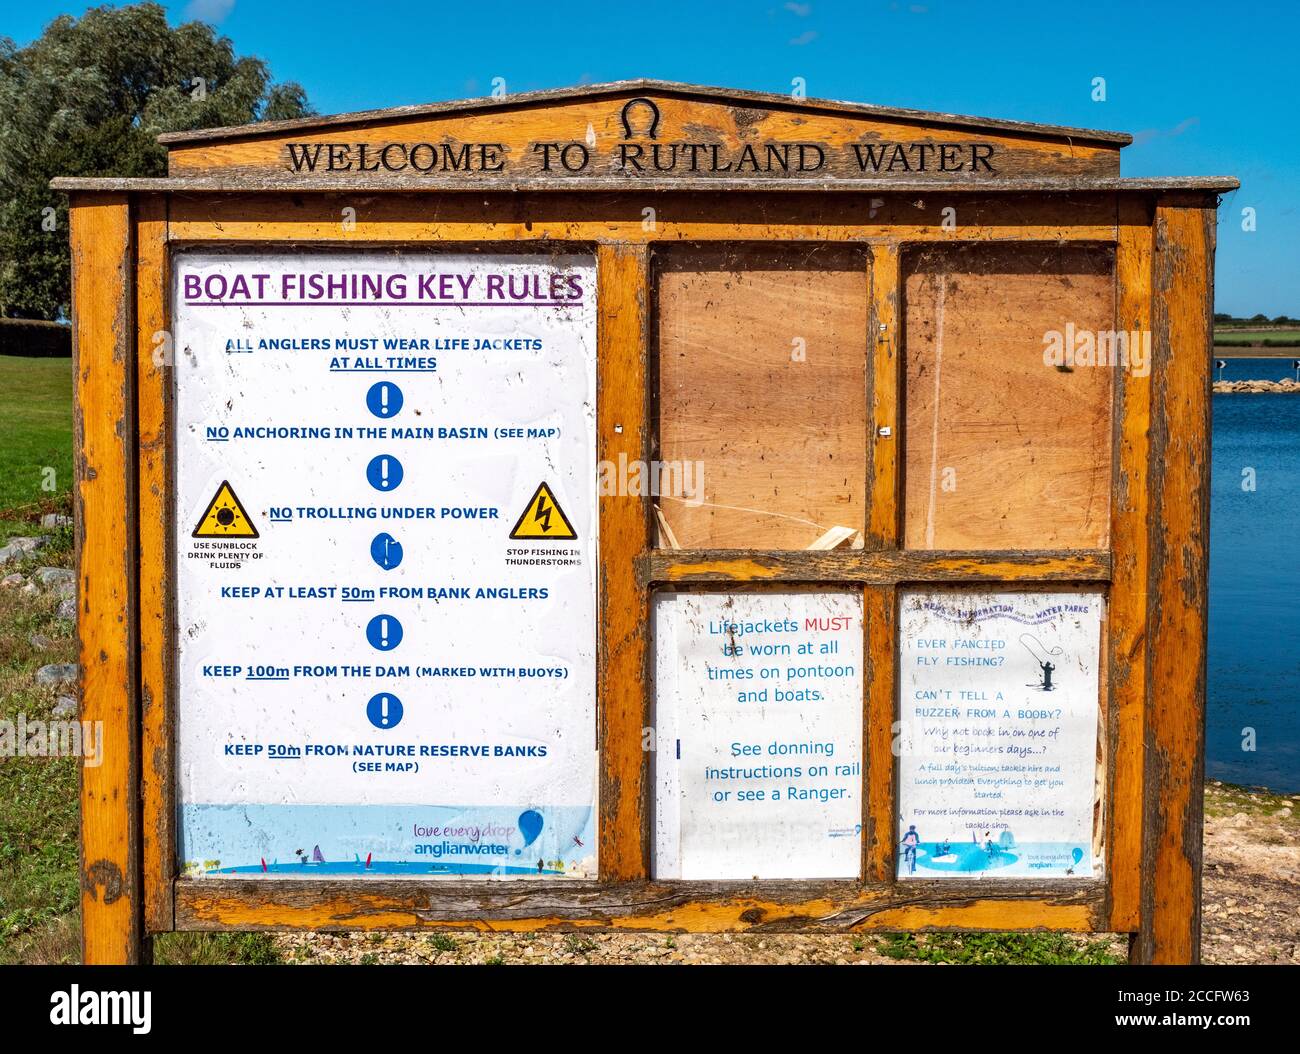 Old wooden visitor notice board with boating and angling rules, next to Rutland Water – a reservoir, artificial lake and nature reserve. England, UK. Stock Photo